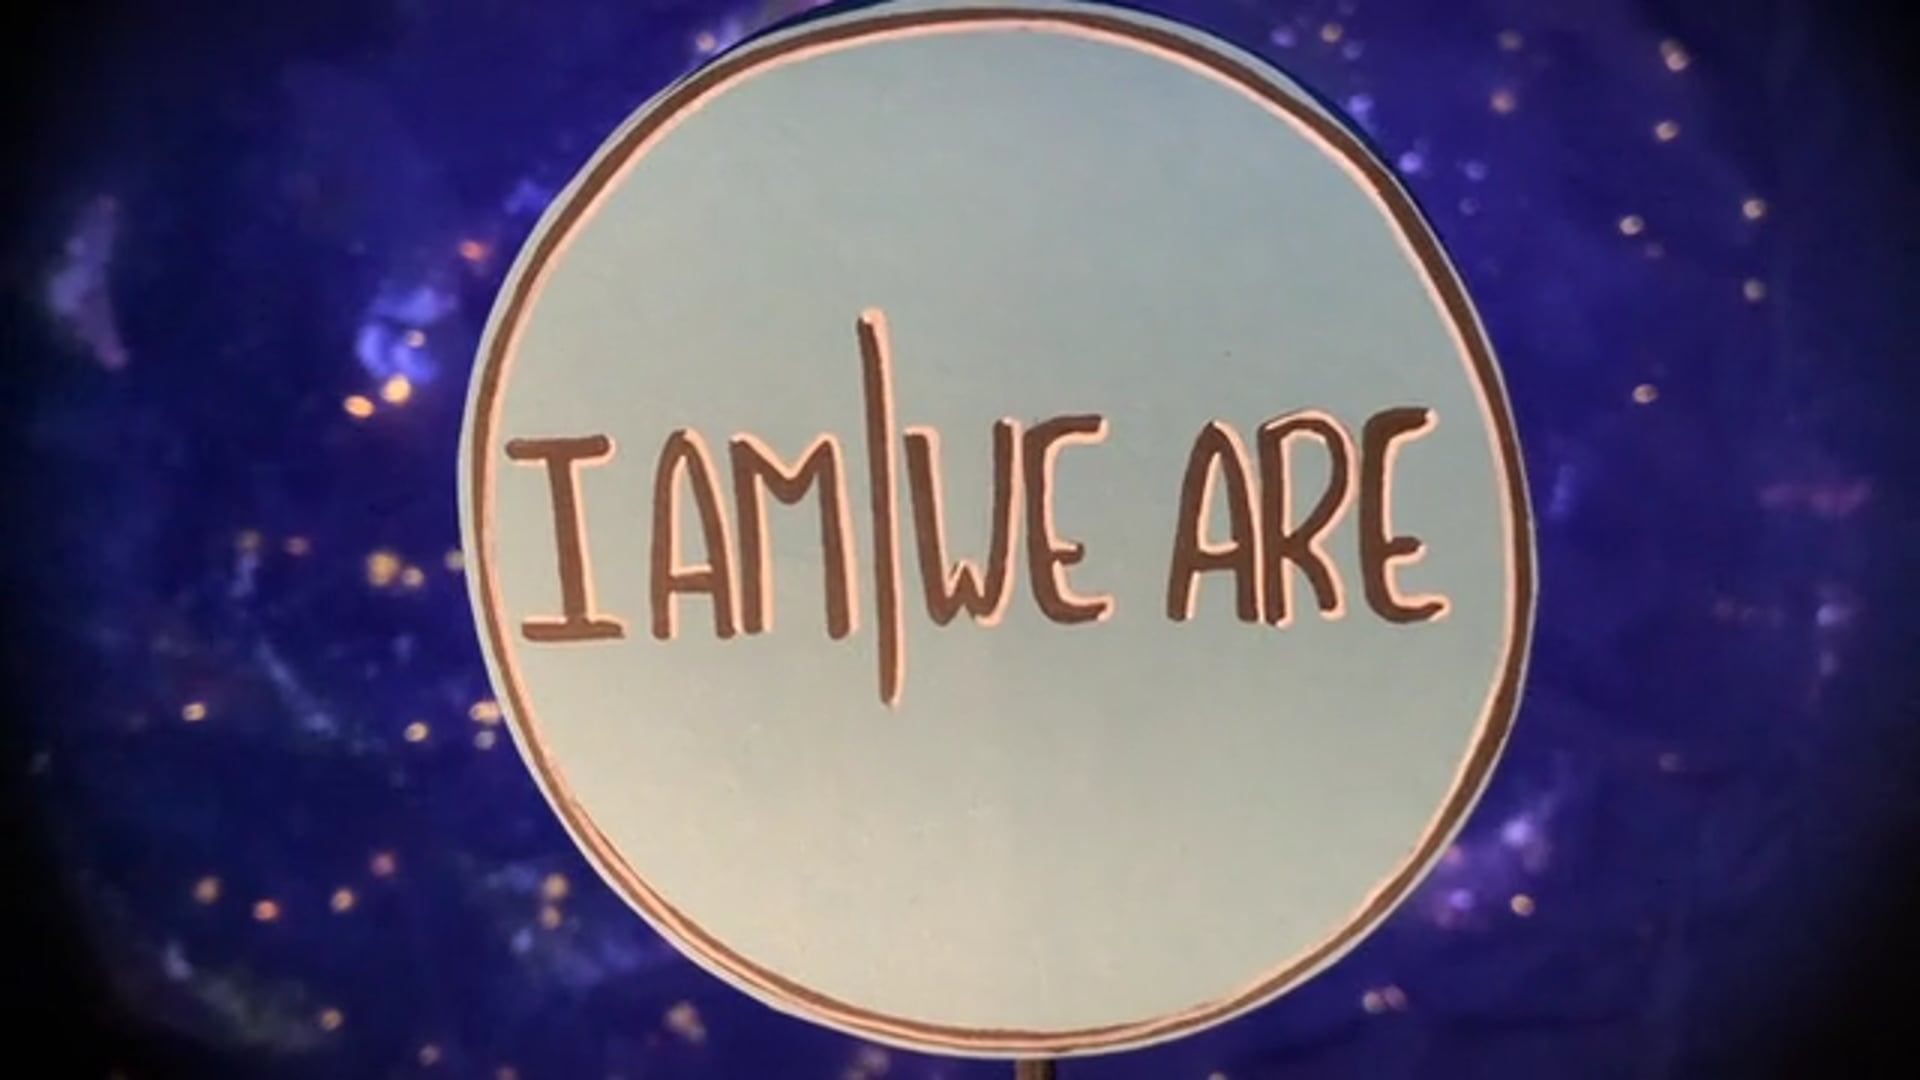 I AM | WE ARE